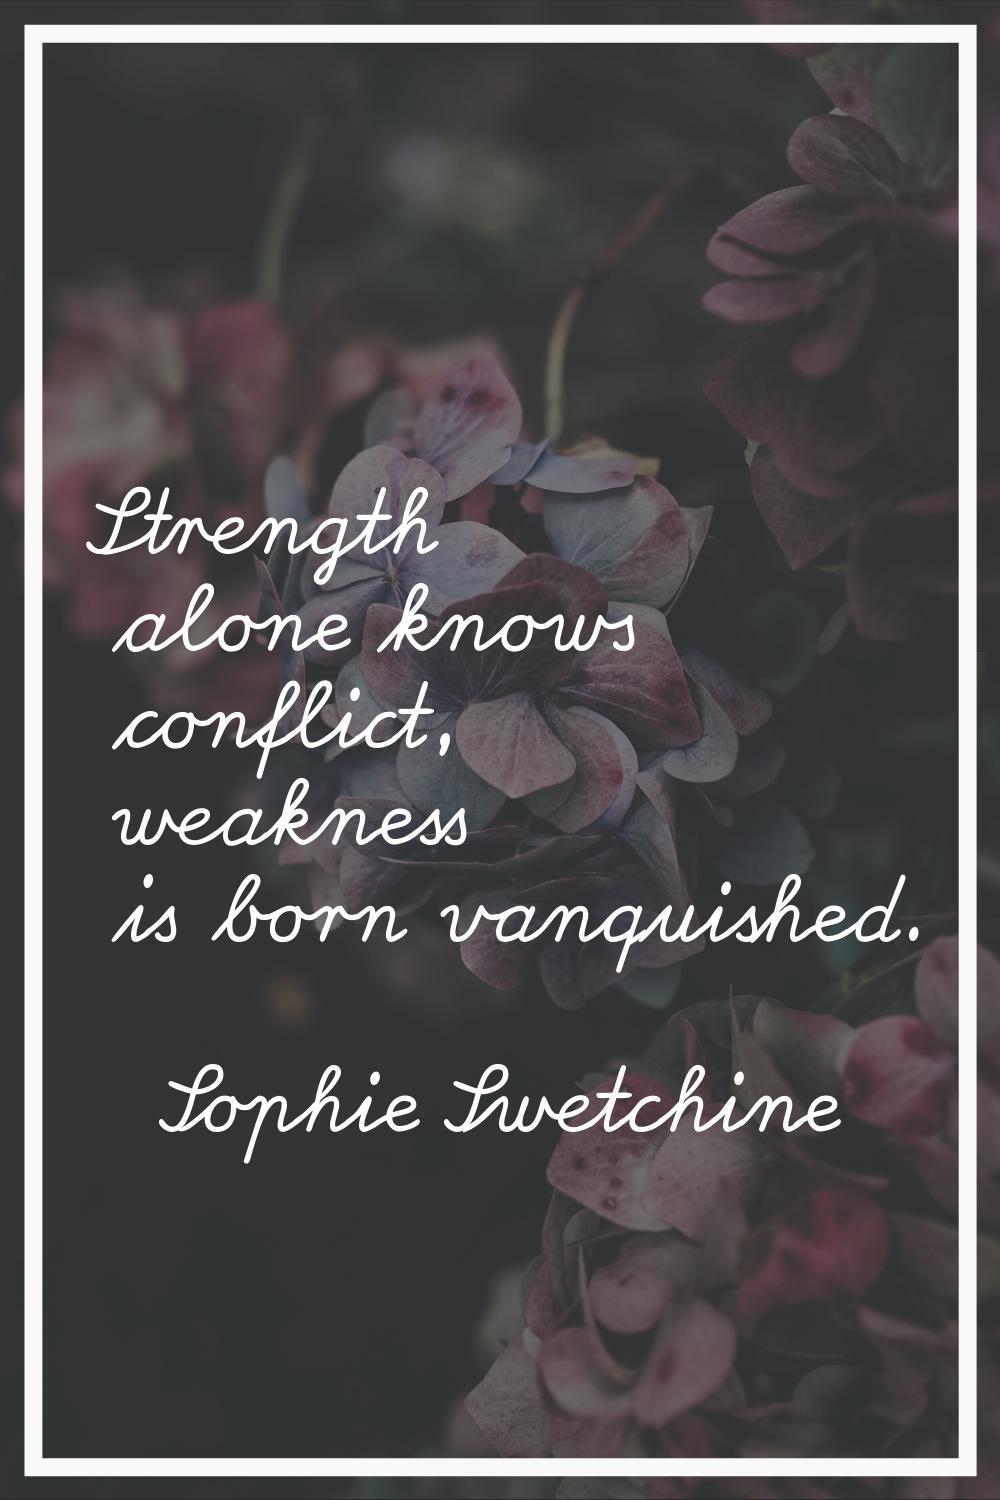 Strength alone knows conflict, weakness is born vanquished.